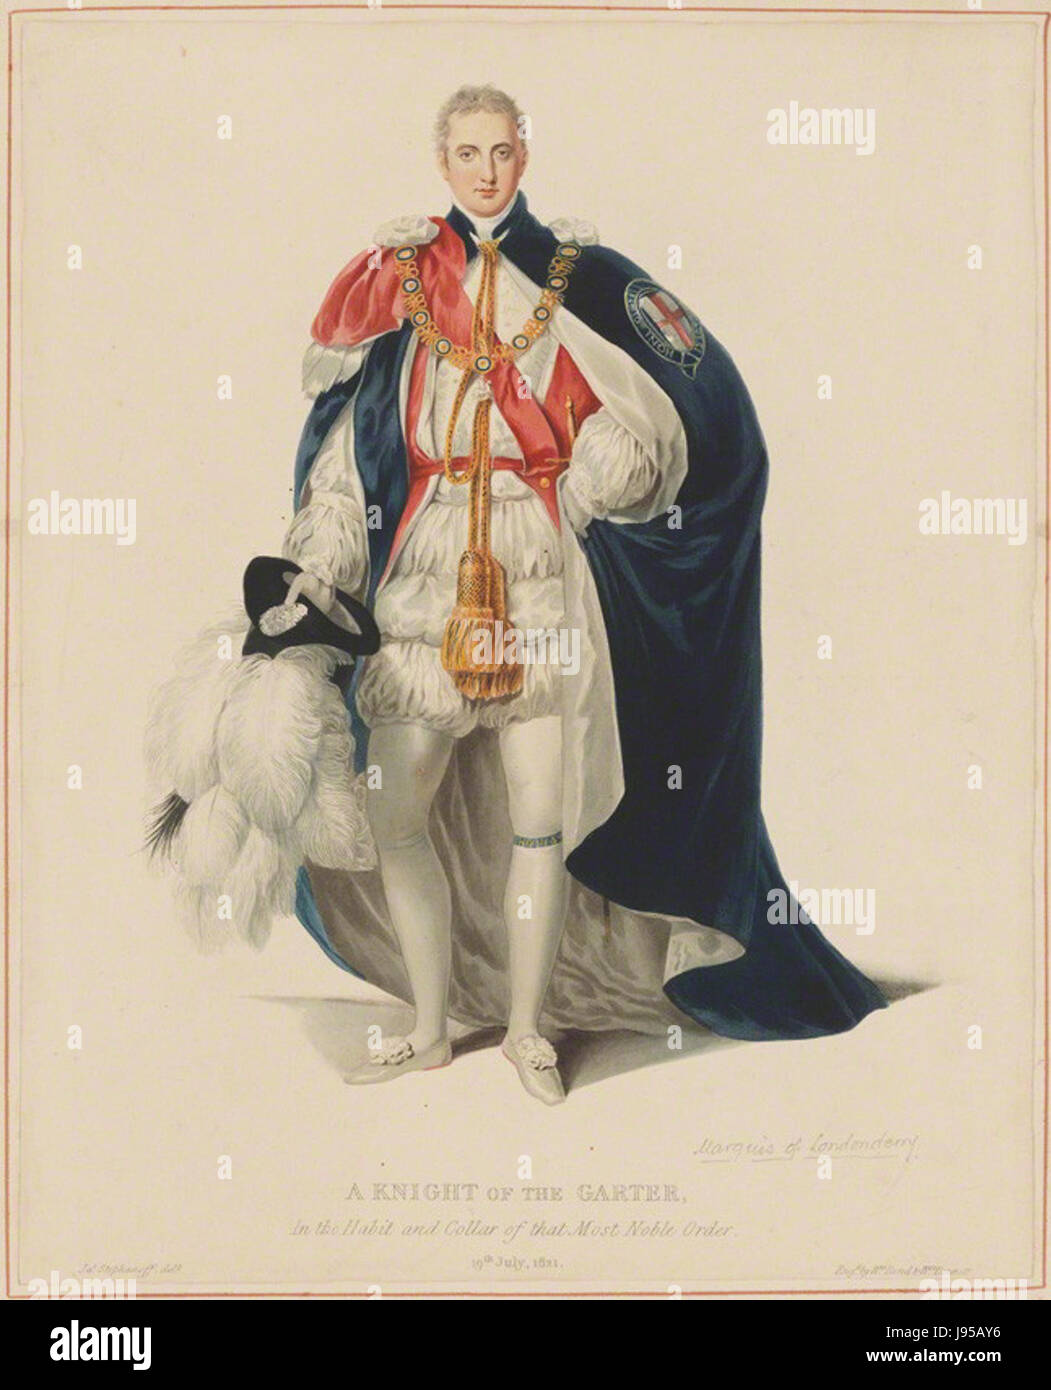 Robert Stewart, 2nd Marquess of Londonderry (Lord Castlereagh) by William Bond, by William Bennett, after James Stephanoff Stock Photo